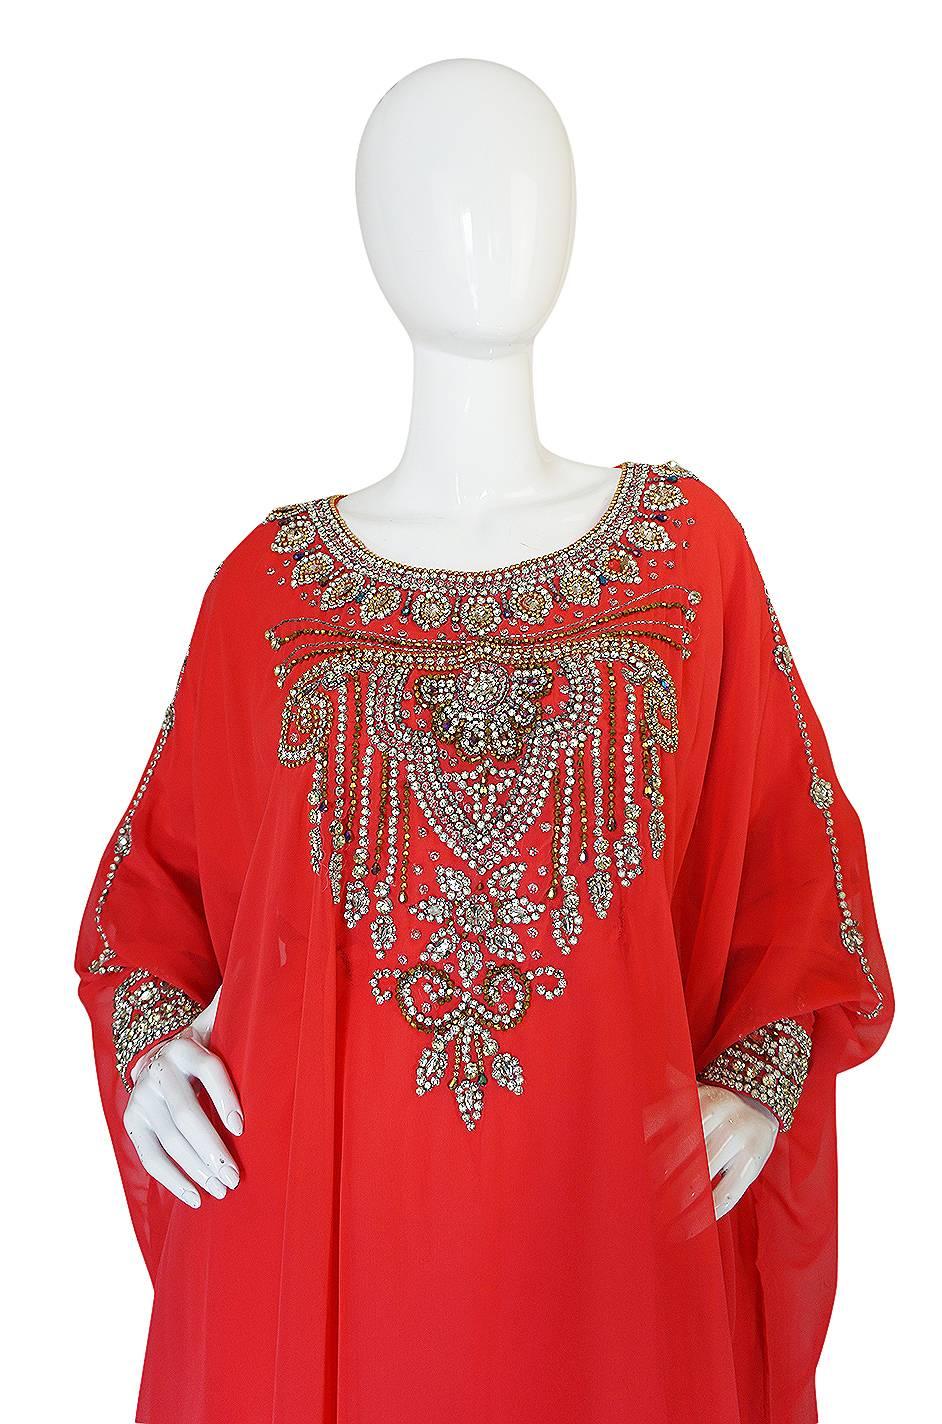 Women's 1960s Elaborate Crystal Covered Jewelled Red Caftan Dress